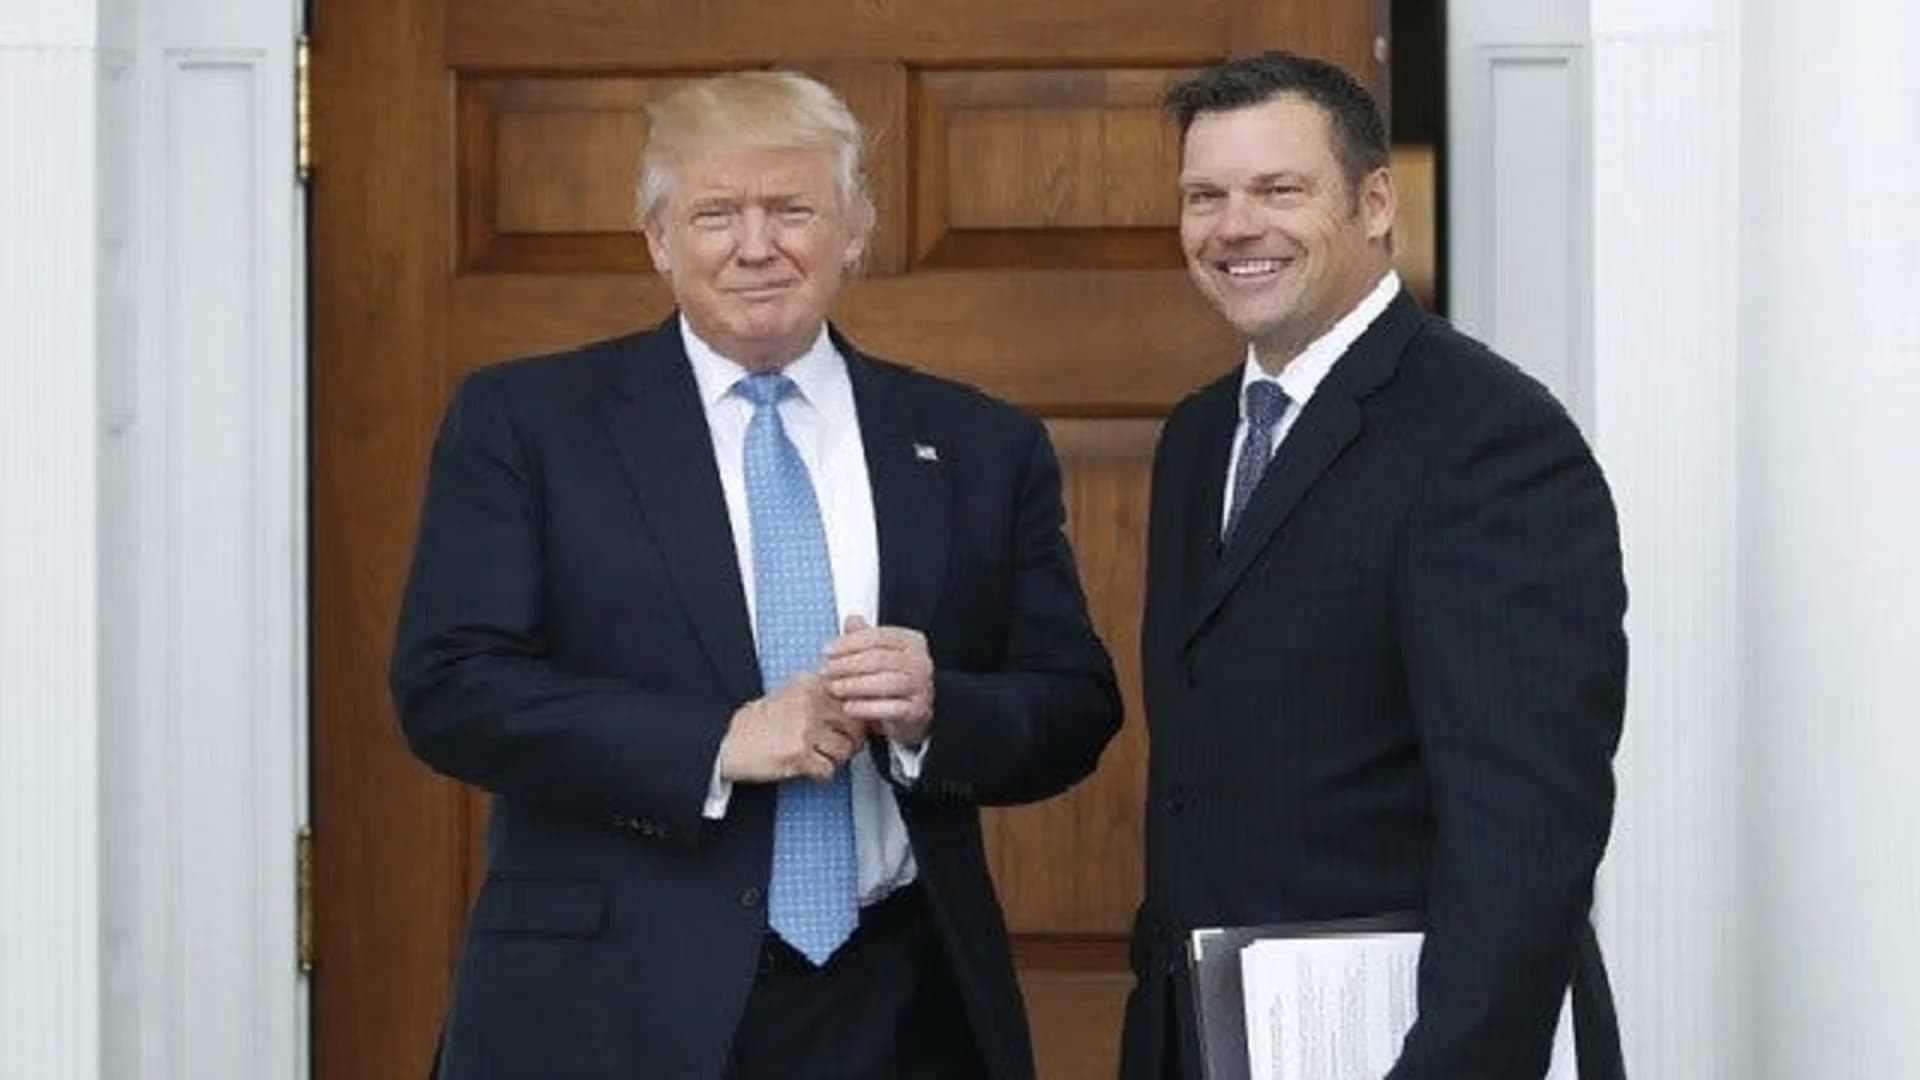 Trump voter fraud commission faces lawsuit from member